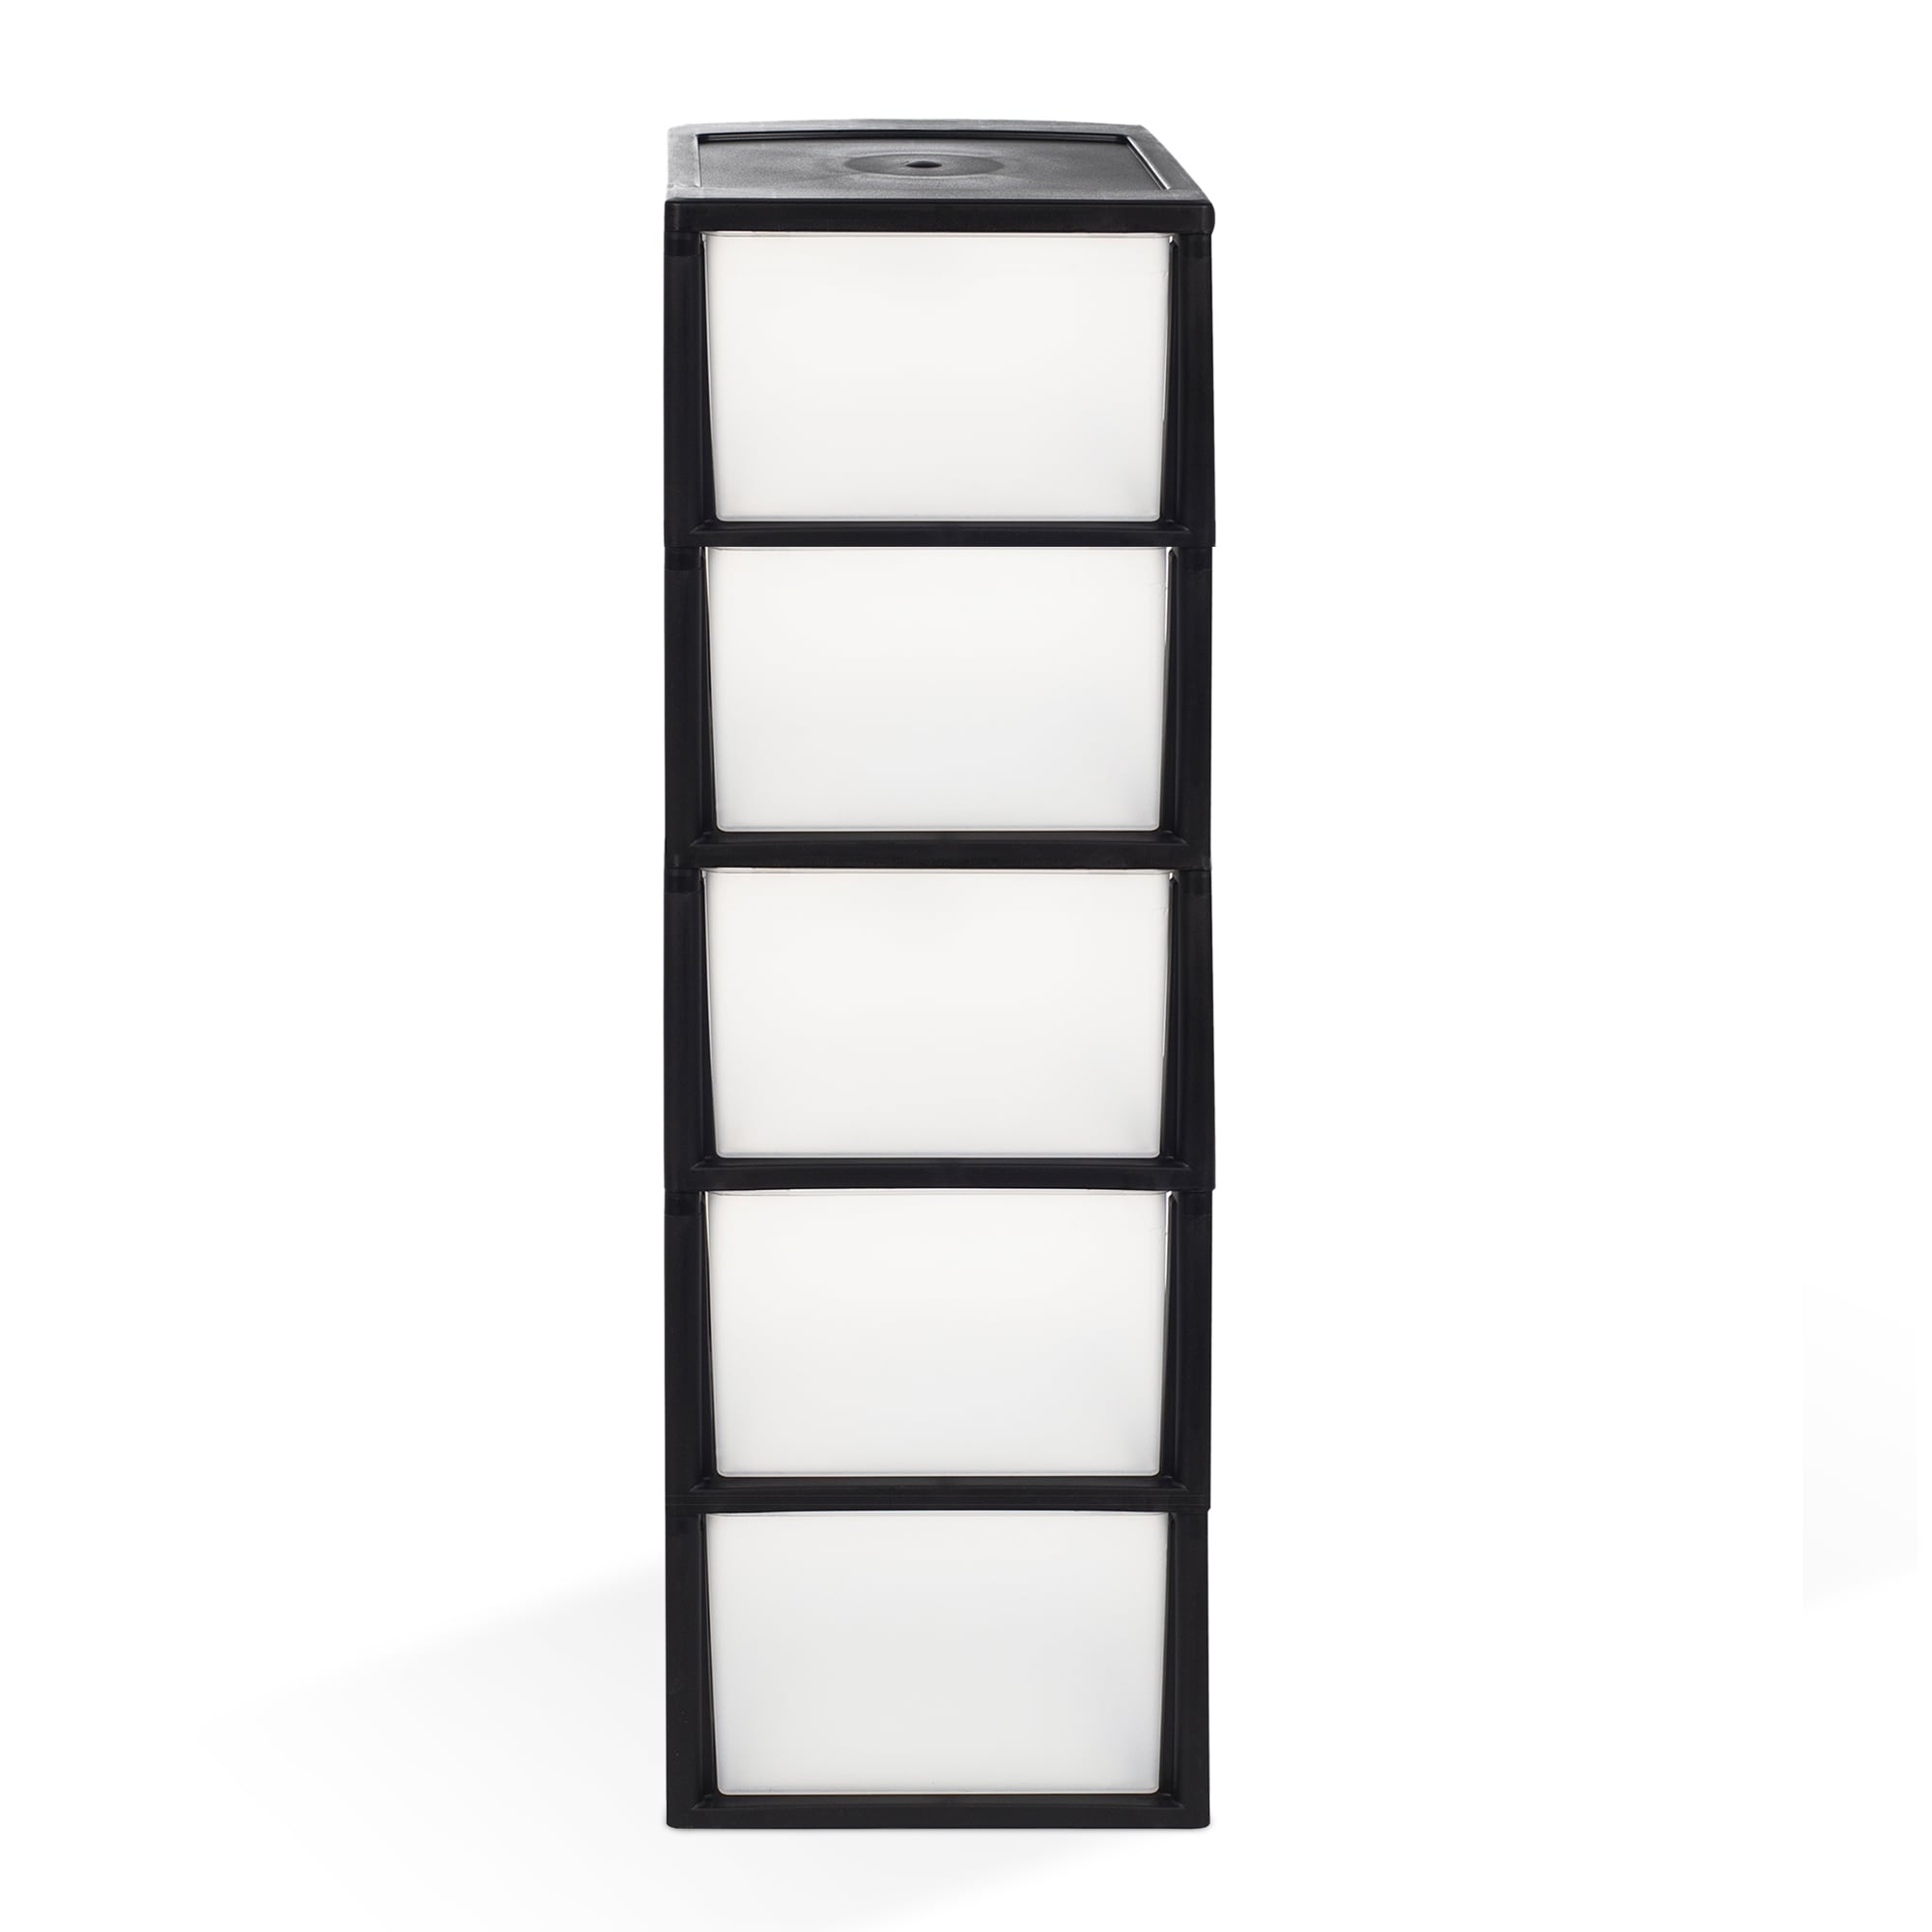 https://ak1.ostkcdn.com/images/products/is/images/direct/0ab4dff79f1761d1319b1239f72286ffb309cc47/MQ-Eclypse-5-Drawer-Plastic-Storage-Unit-with-Clear-Drawers-%282-Pack%29.jpg